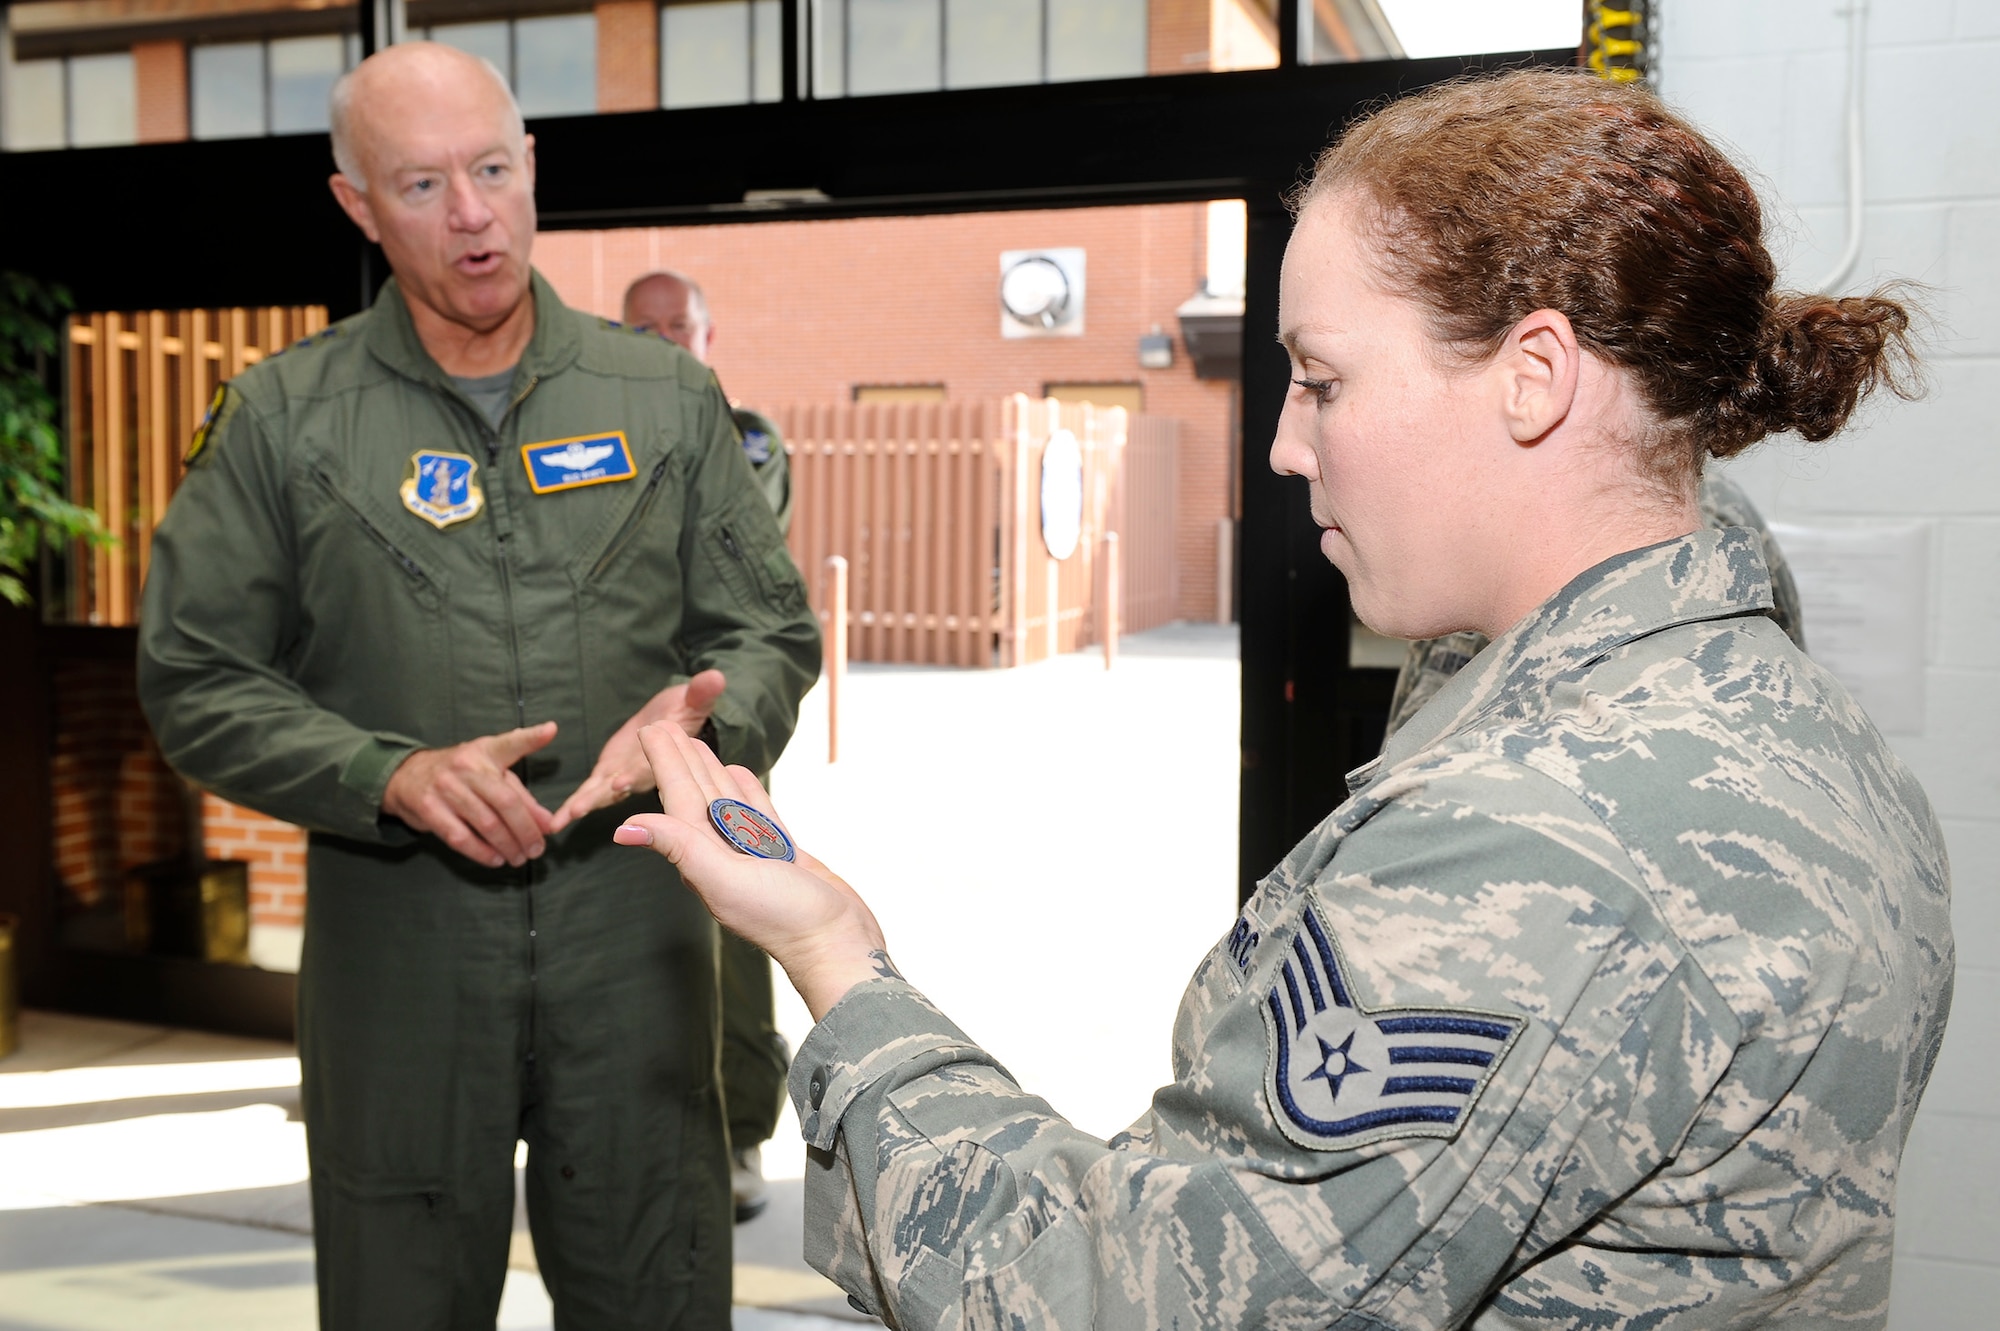 U.S. Air Force Staff Sgt. Bethany Tolley, 461st Aircraft Maintenance Squadron, receives a coin for outstanding performance from Lt. Gen. Harry Wyatt III, Air National Guard director, Robins Air Force Base, Ga., Dec. 05, 2011.  Tolley looked over the coin as Wyatt explained some unique aspects of the coin in reference to the Air National Guard.   (National Guard photo by Master Sgt. Roger Parsons/Released)